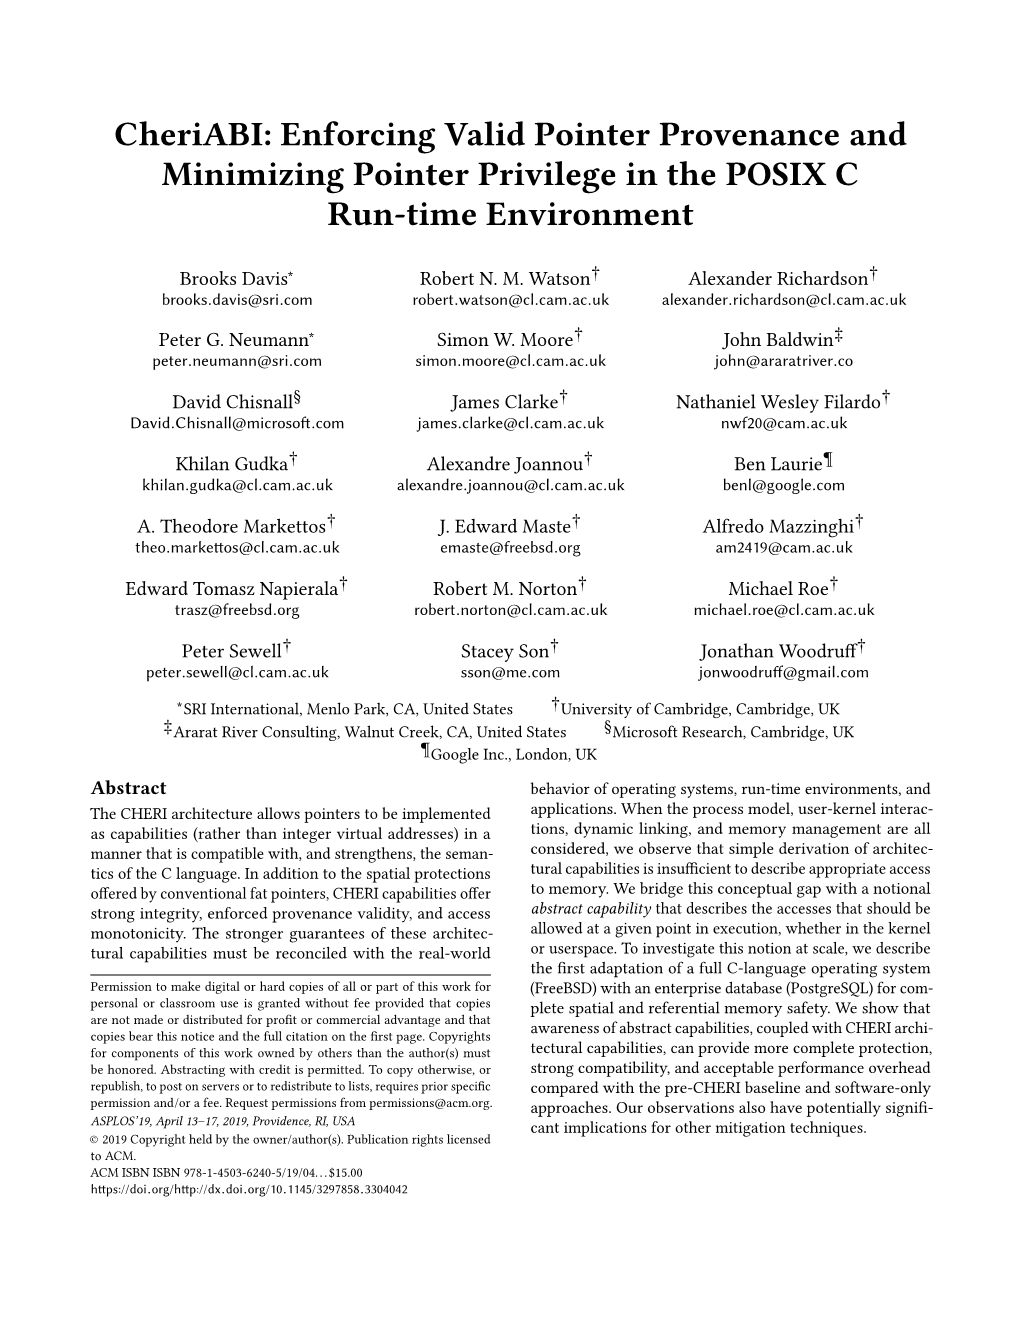 Cheriabi: Enforcing Valid Pointer Provenance and Minimizing Pointer Privilege in the POSIX C Run-Time Environment